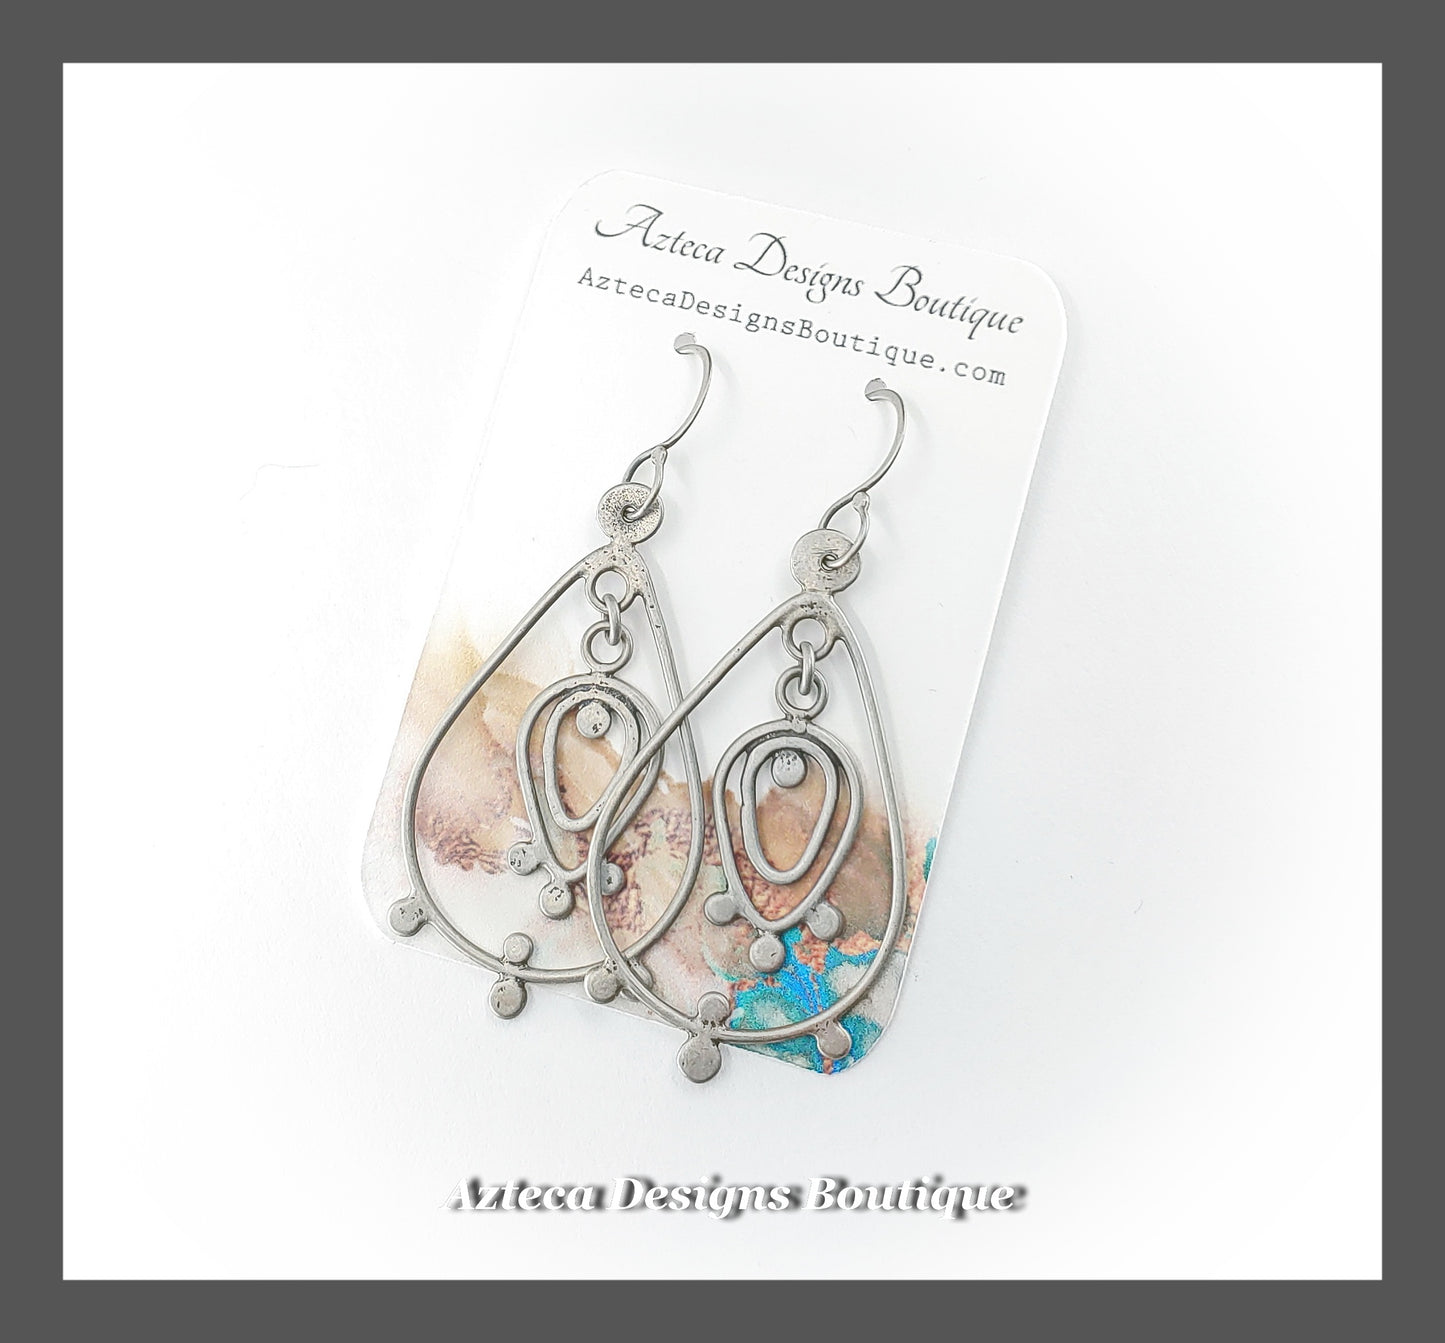 Hand Fabricated Argentium Silver Earrings + Lace and Spice Collection